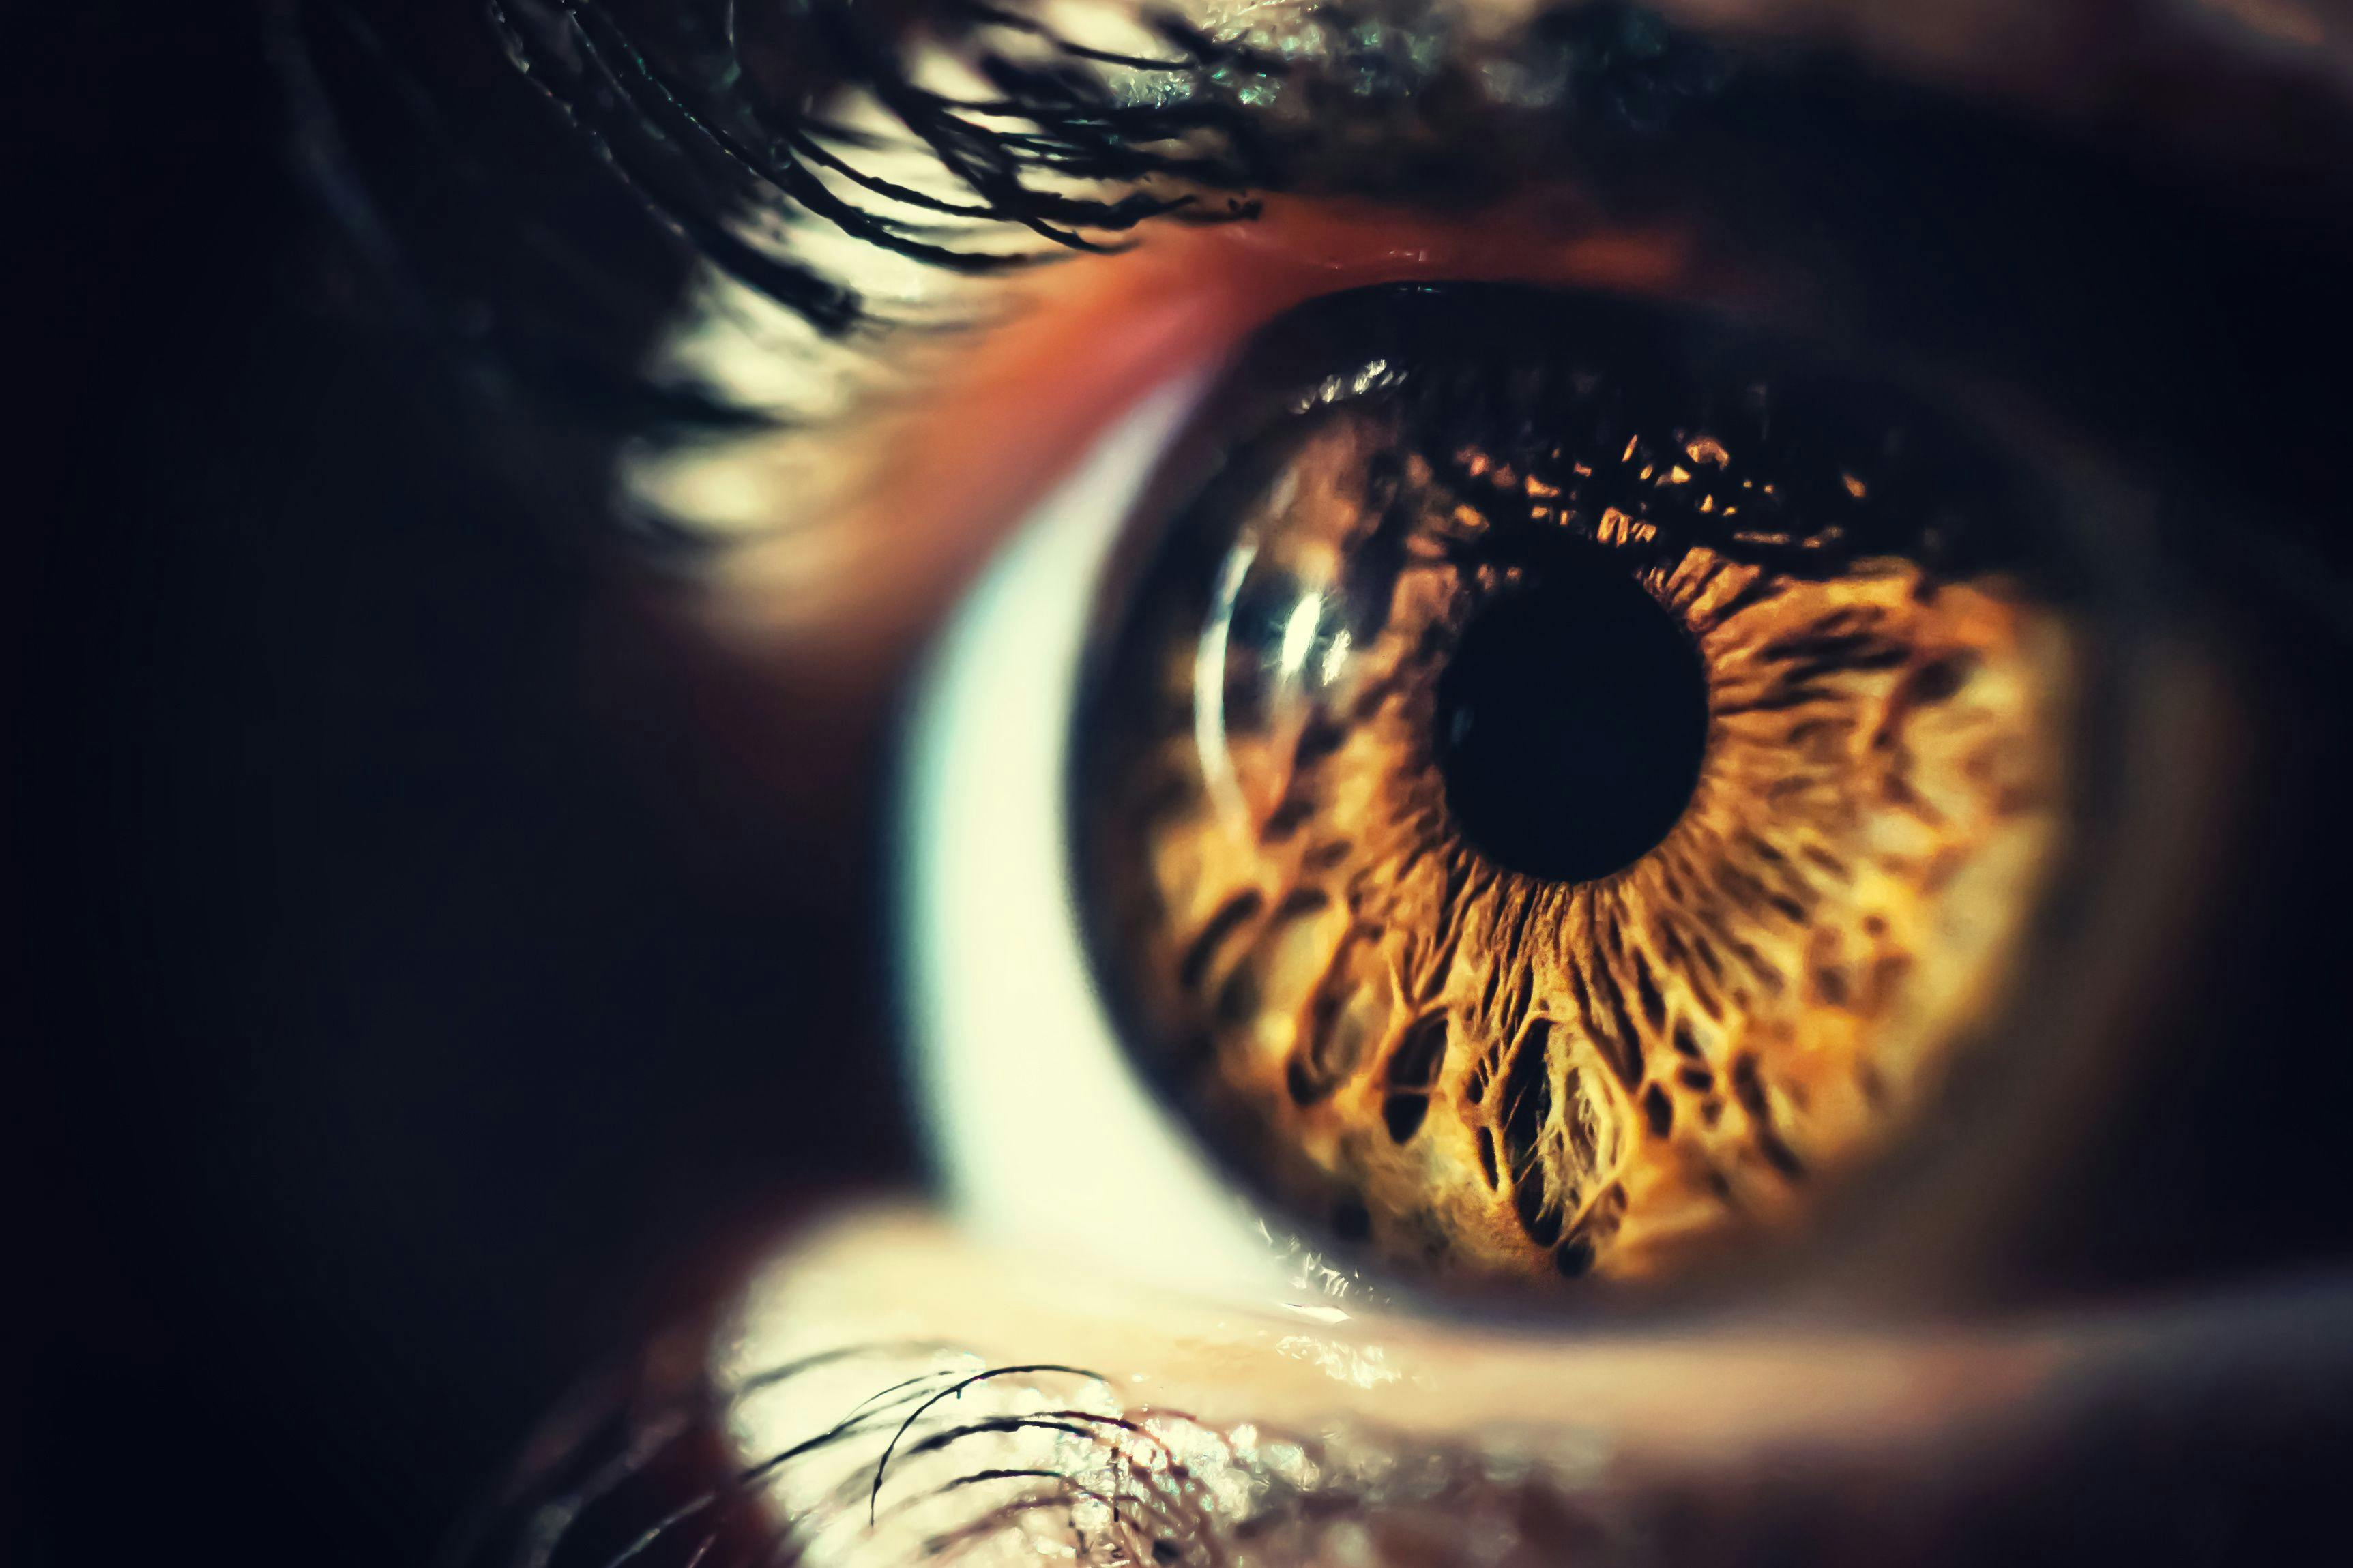 Exploratory data analysis from the trial of lampalizumab (Genentech/Roche) has shed new light on the behavior of geographic atrophy, the advanced form of age-related macular degeneration. (Adobe Stock image)